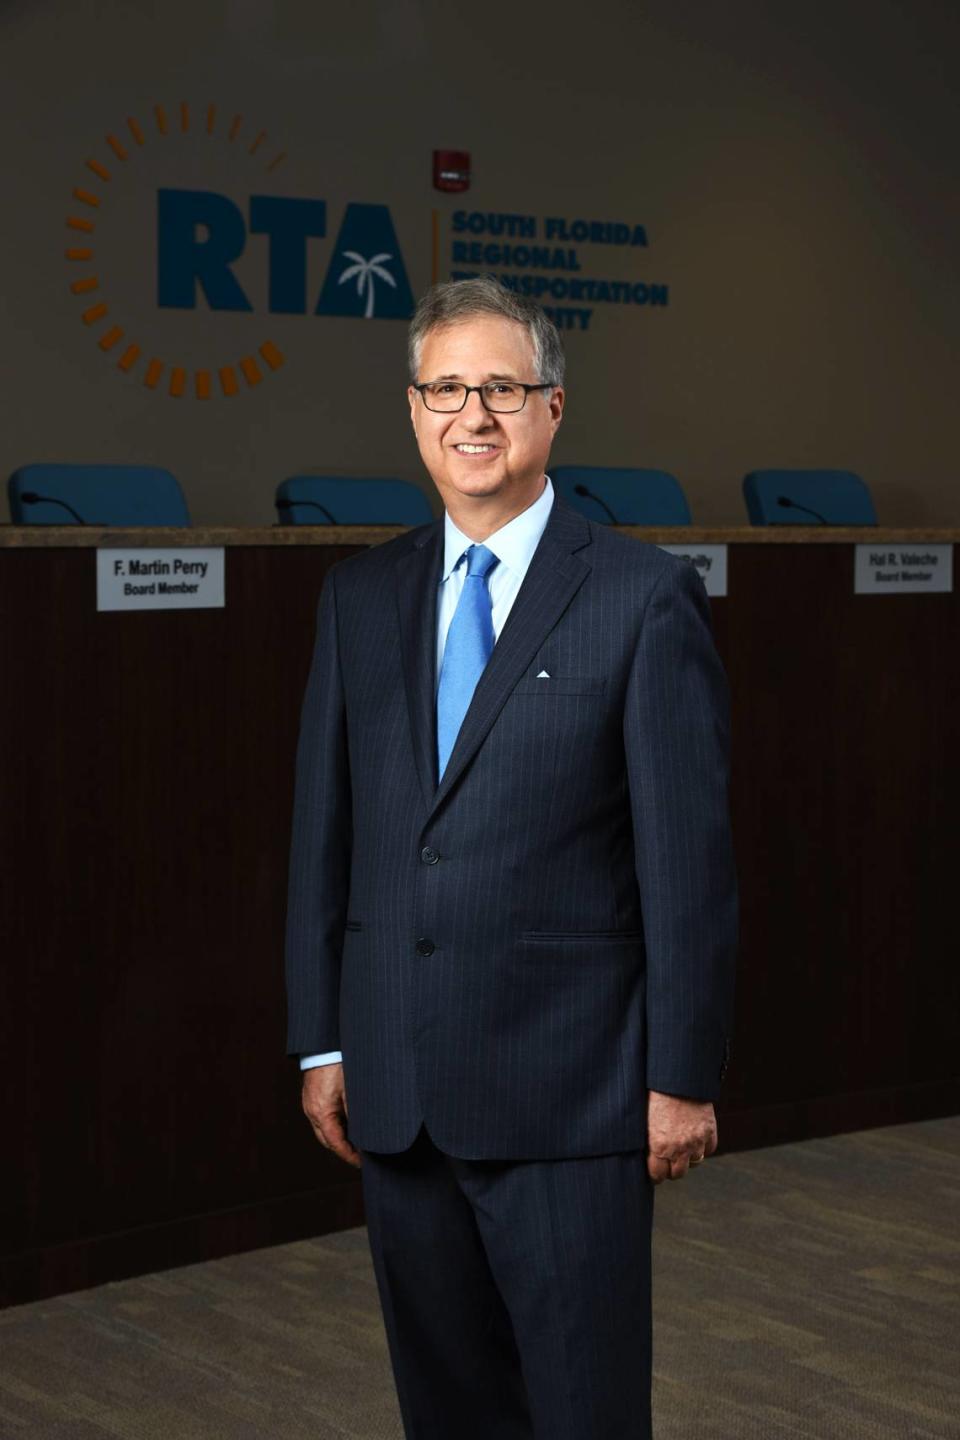 Steven Abrams, a former chairman of the Tri-Rail board, became the transit agency’s director in 2018. He announced his resignation on Jan. 28, 2022, and said he will remain in the post as the board searches for a new director.